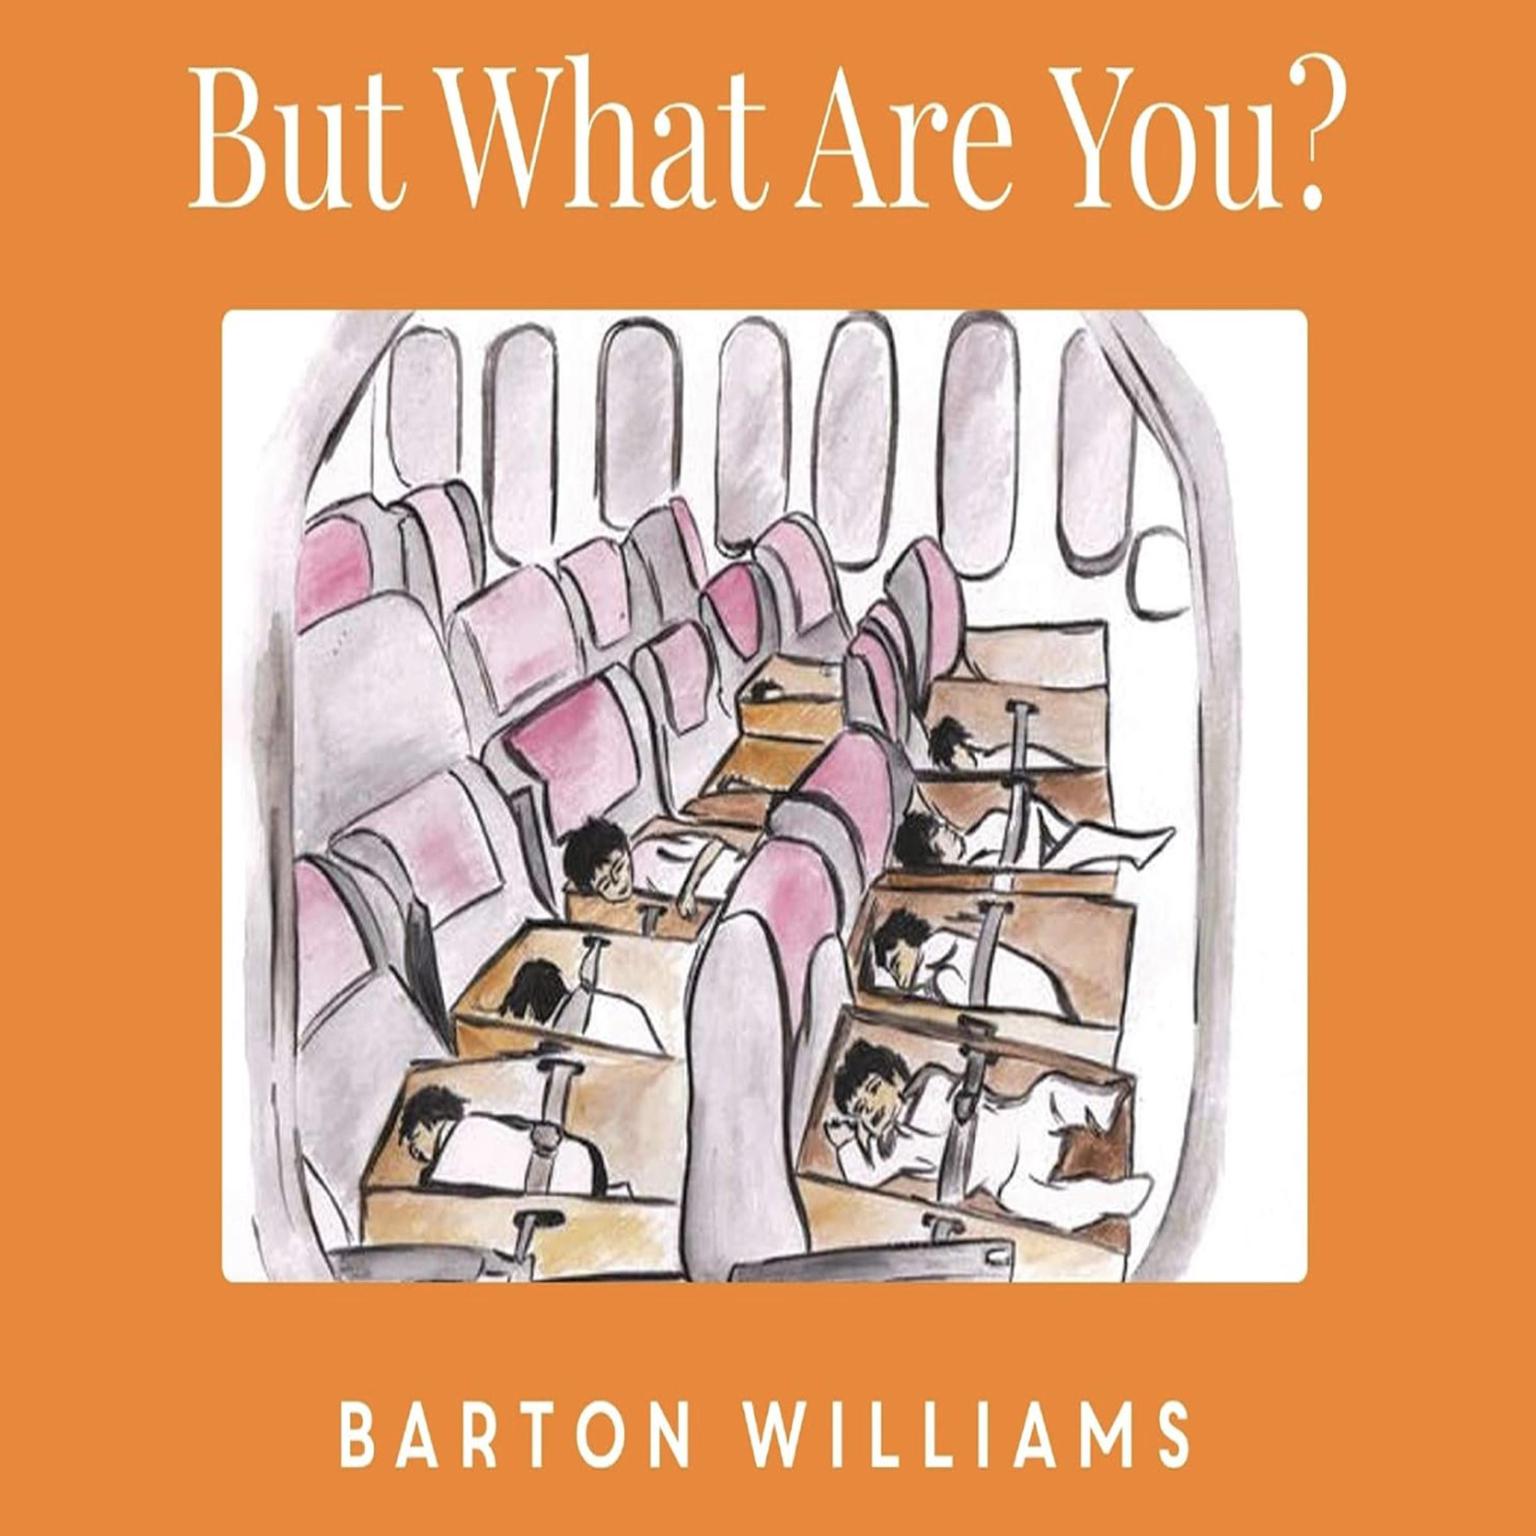 But What Are You? Audiobook, by Barton Williams